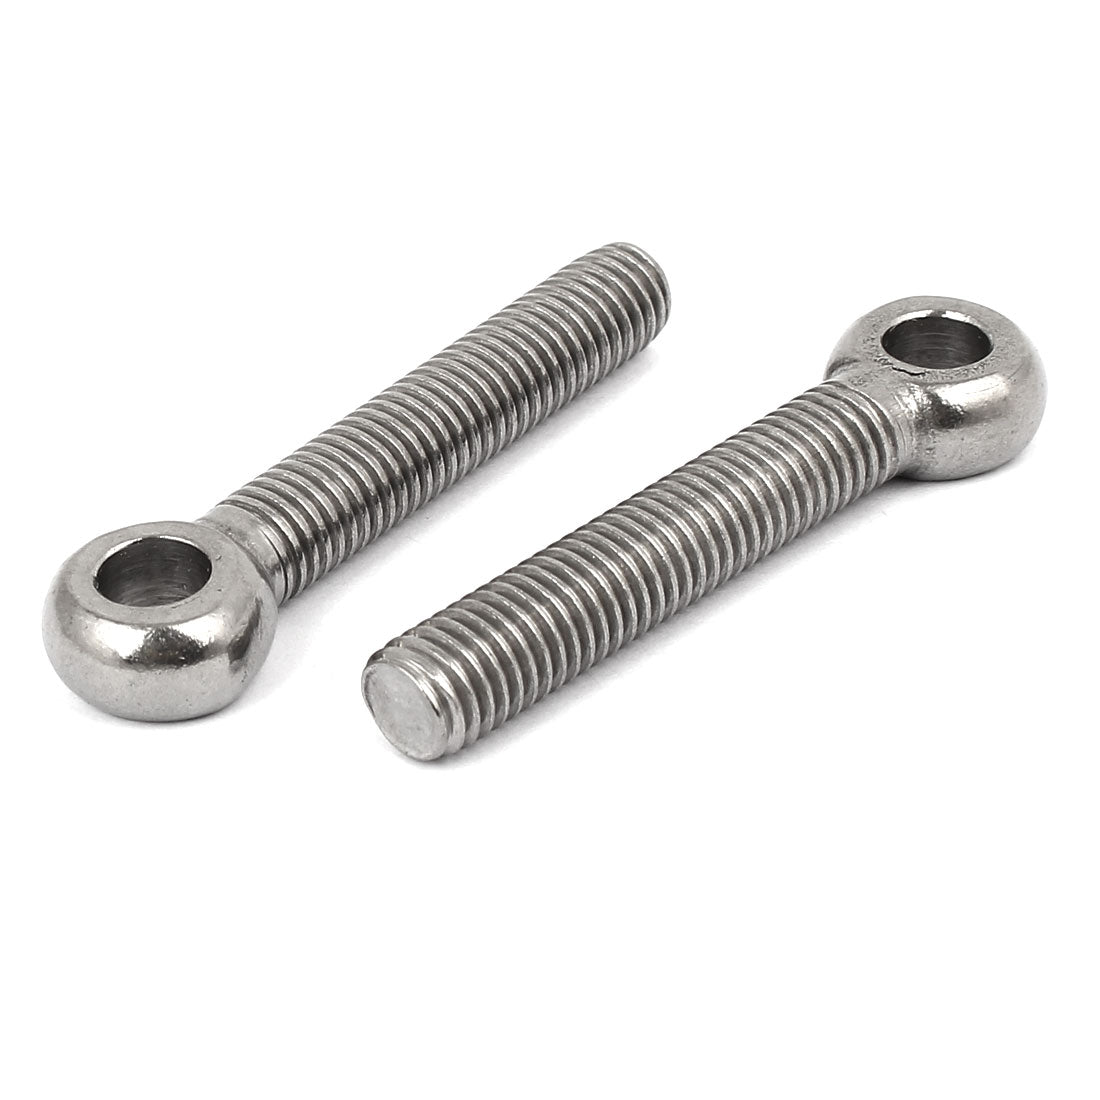 uxcell Uxcell M10x60mm 304 Stainless Steel Machine Shoulder Lifting Eye Bolt Fastener 10pcs